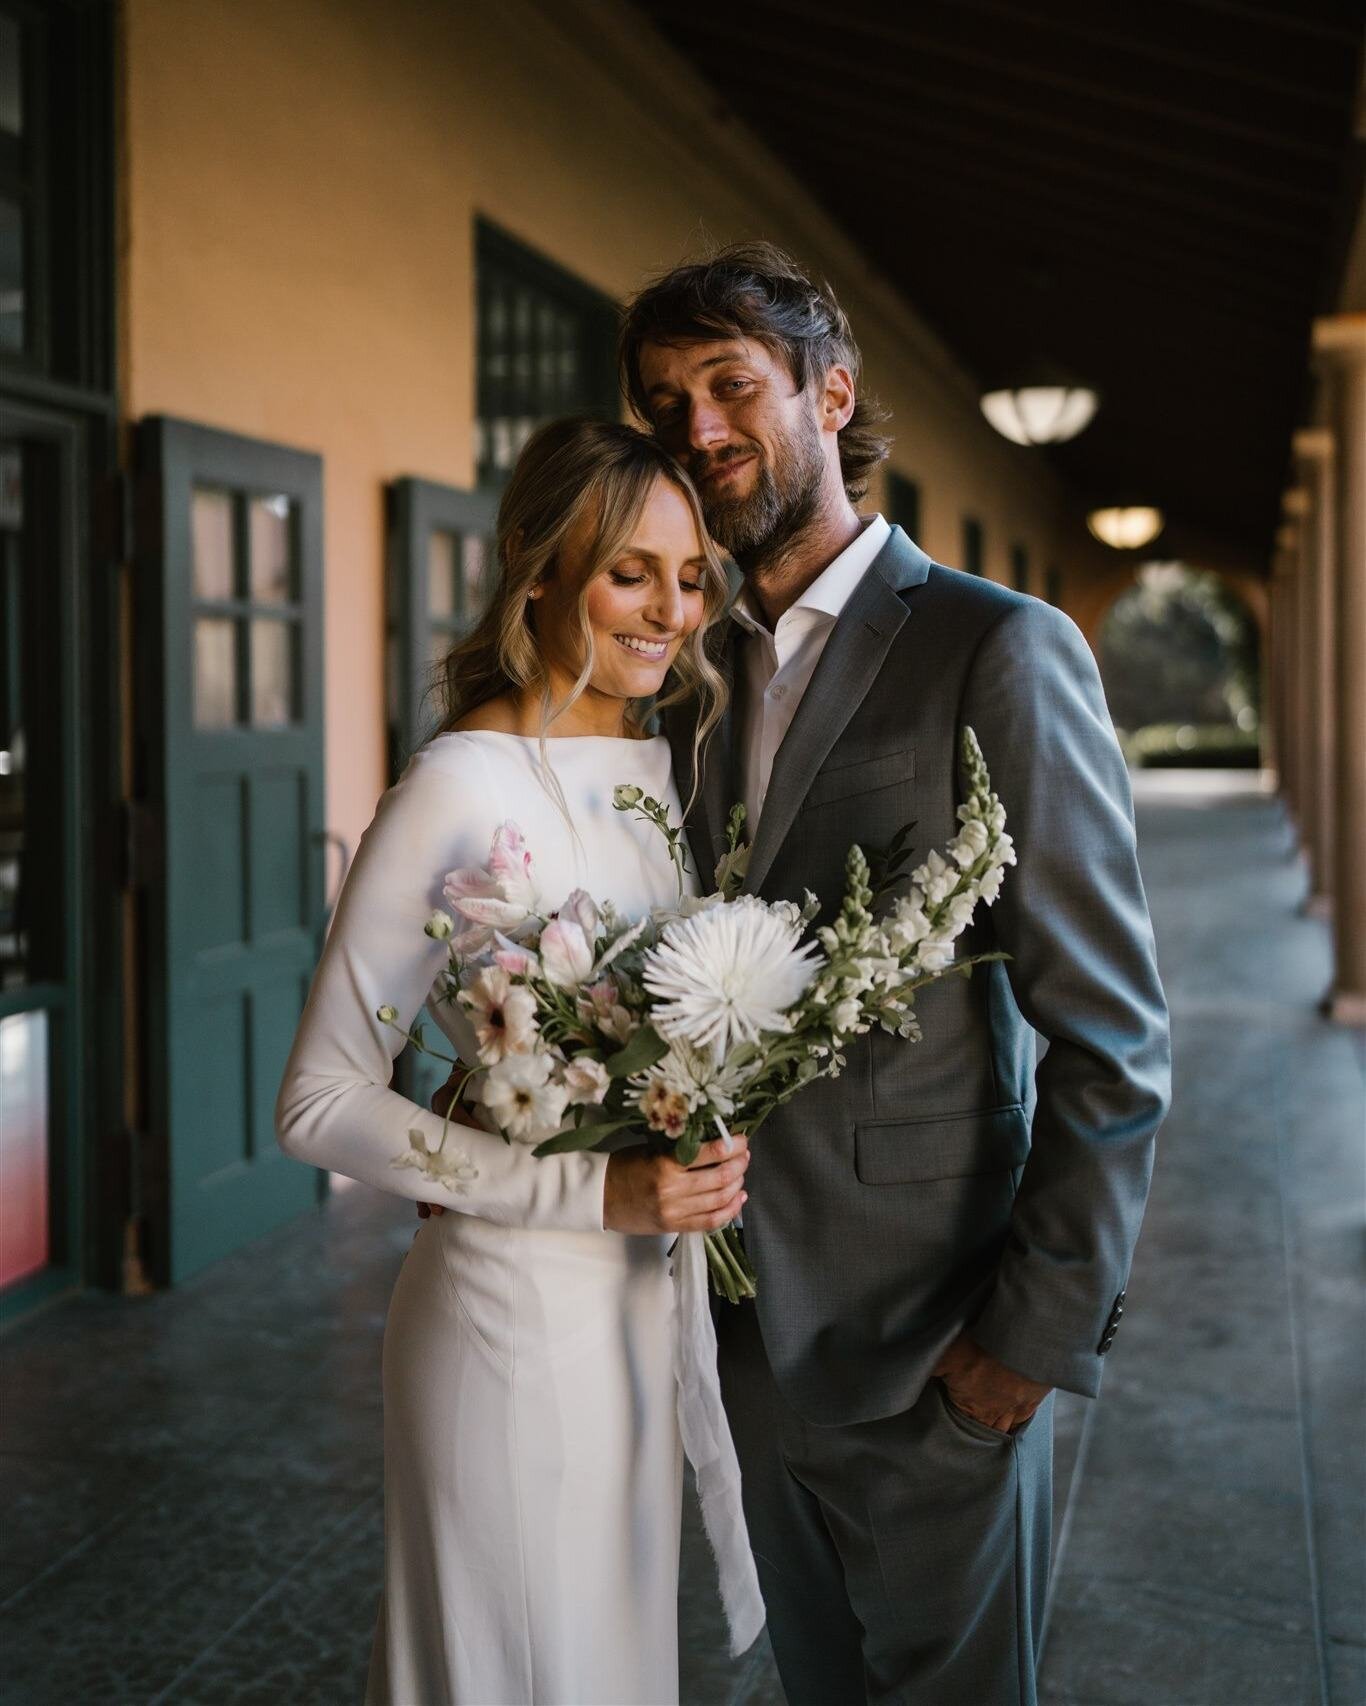 Chris + Deia held their ceremony and reception at The Patio at Moniker General, our intimate venue down the road in @libertystation. But decided to make a quick stop at 177, for the most intimate photos! We're here to show them off 😍

Photographer: 